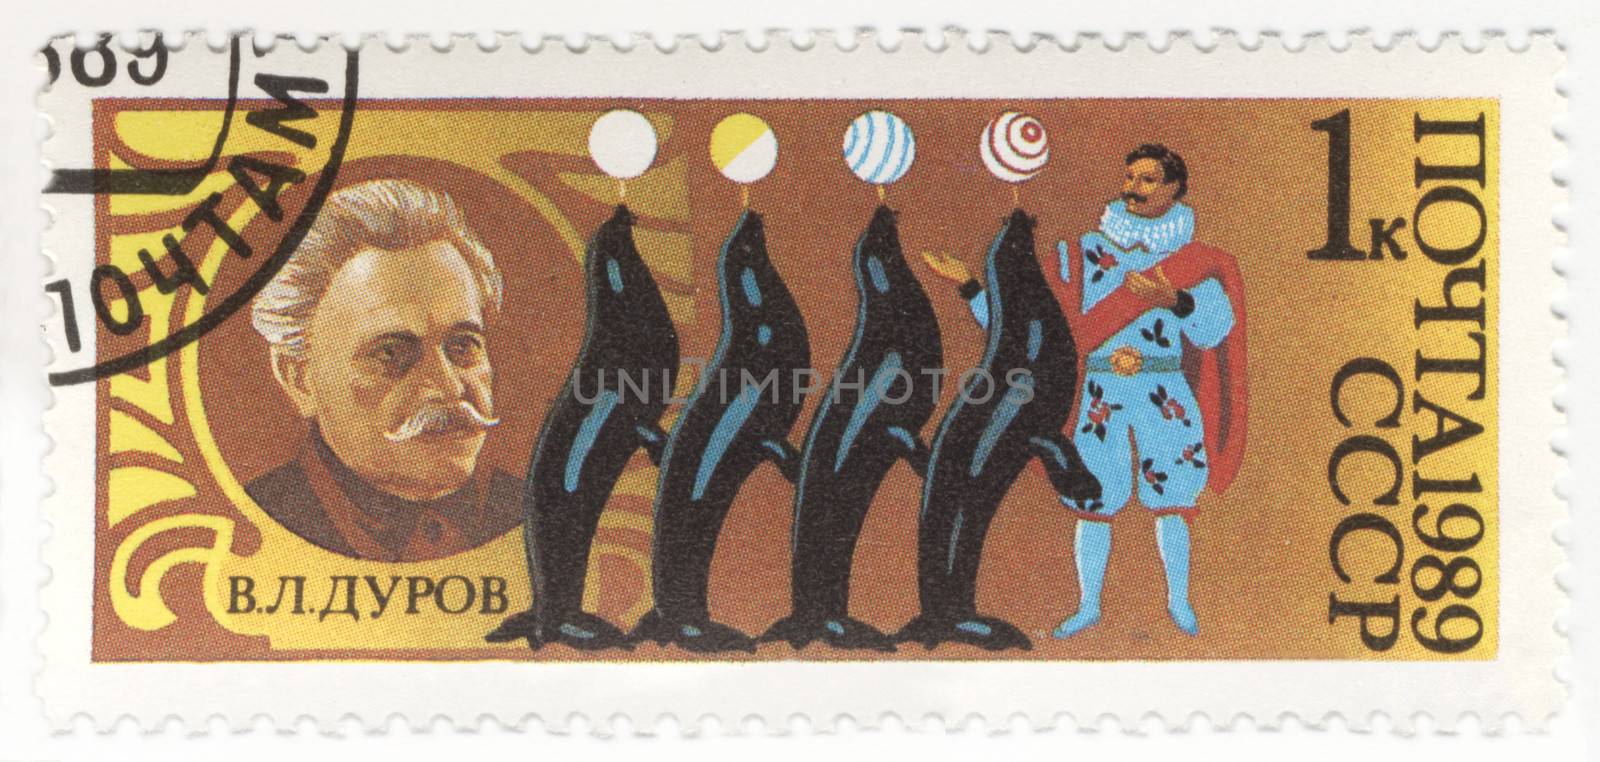 Vladimir Durov, russian clown and trainer on post stamp by wander